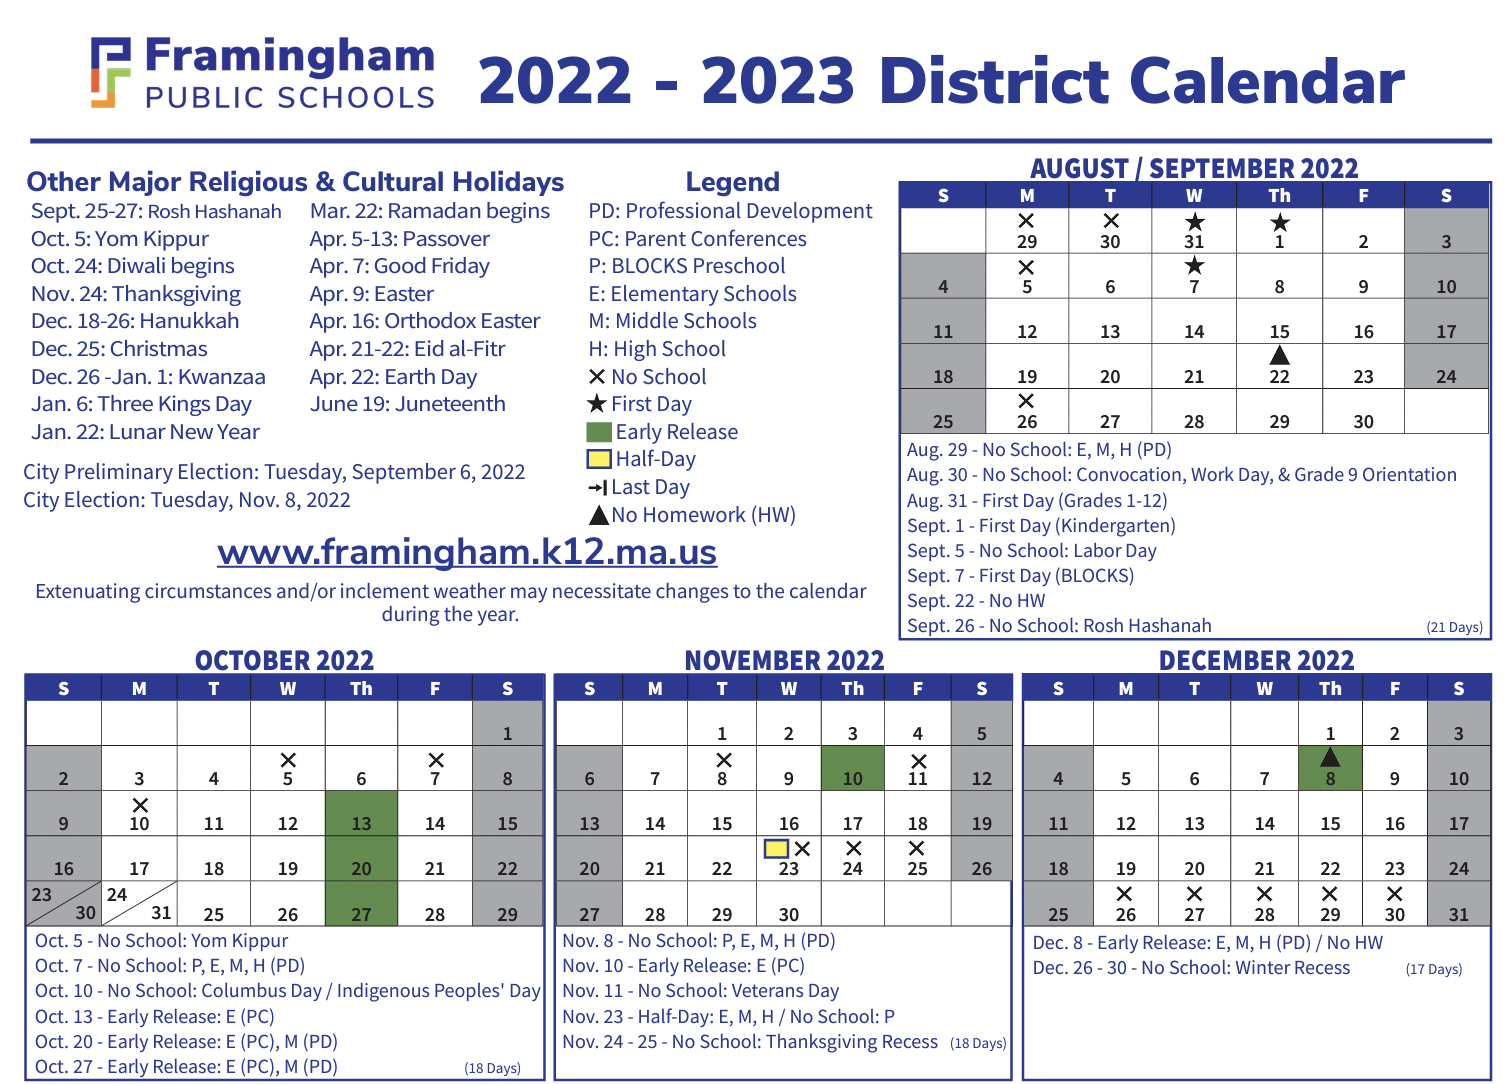 First Look at the Proposed Framingham 202223 School Calendar